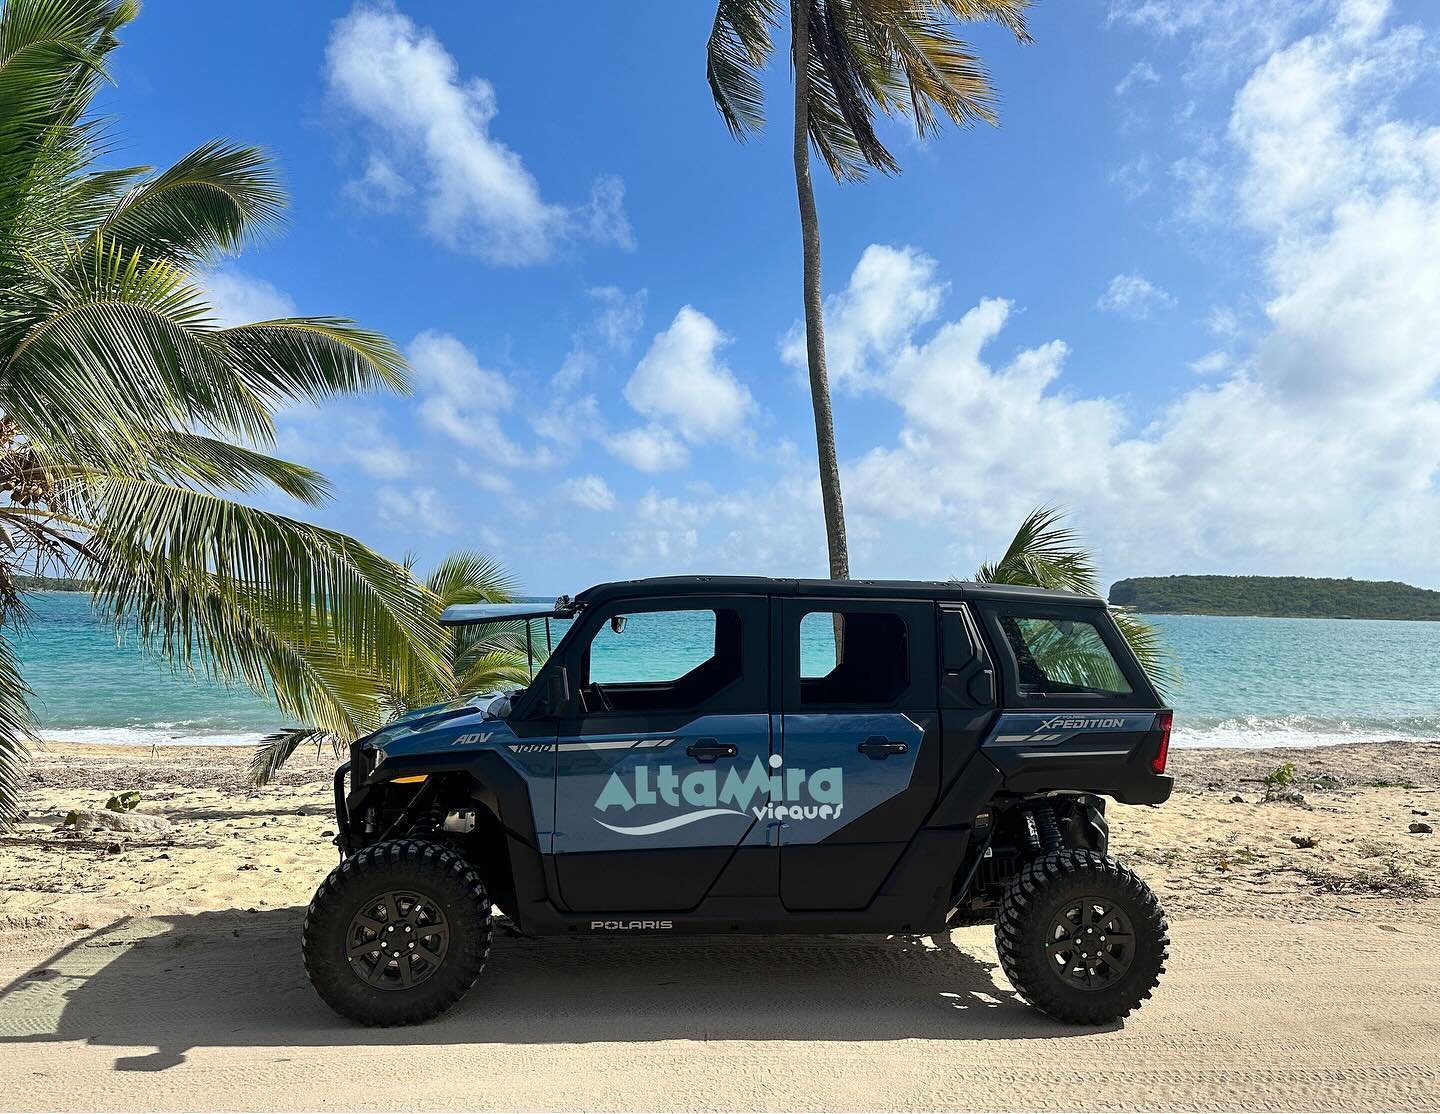 What do you think of this ride?! Beach cruising at its best. #viequeslove #viequesisland #polarisxpedition #puertorico🇵🇷